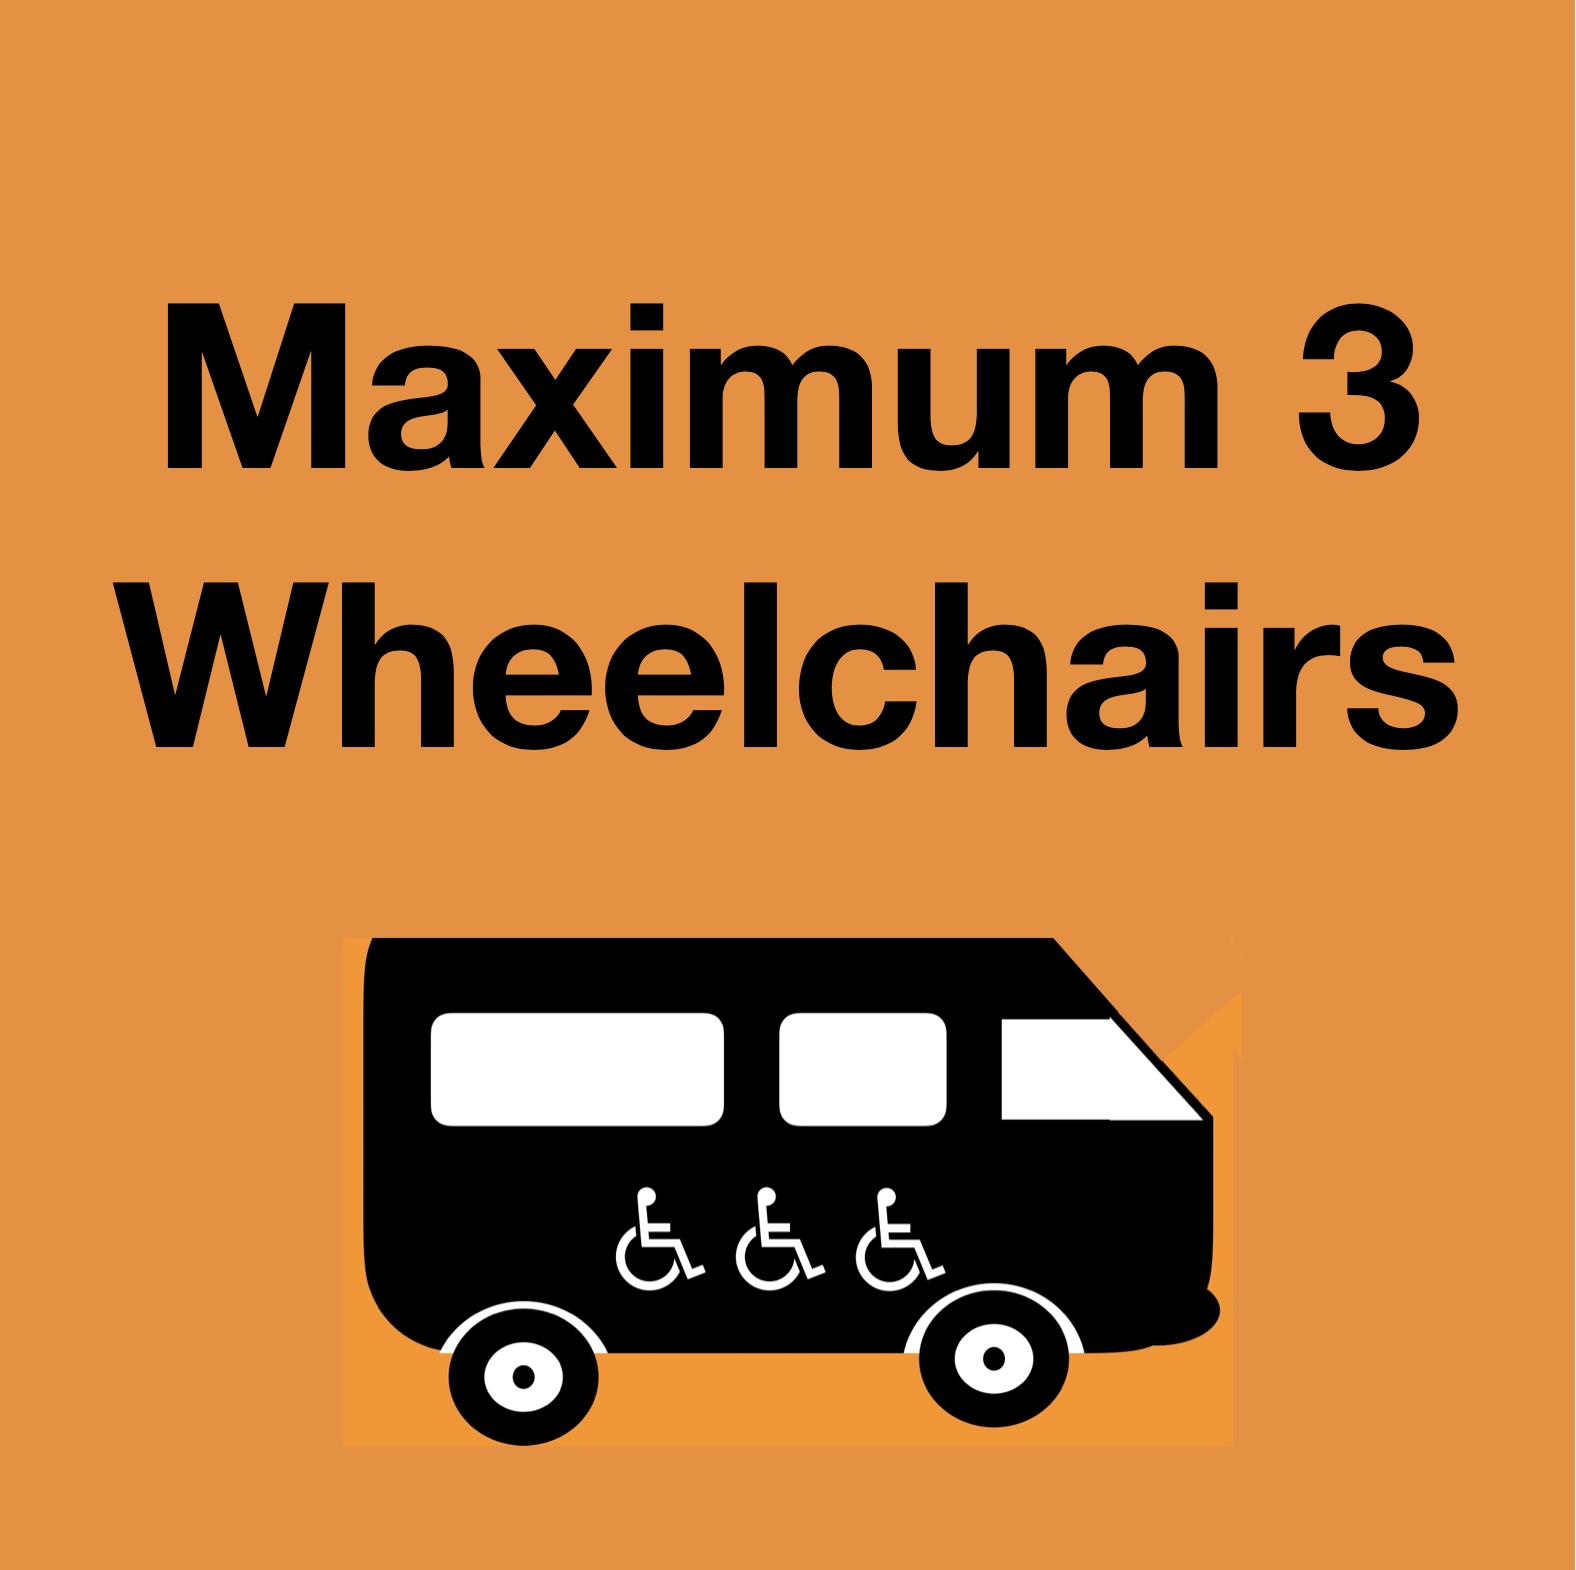 Max Three Wheelchairs In Large Vans